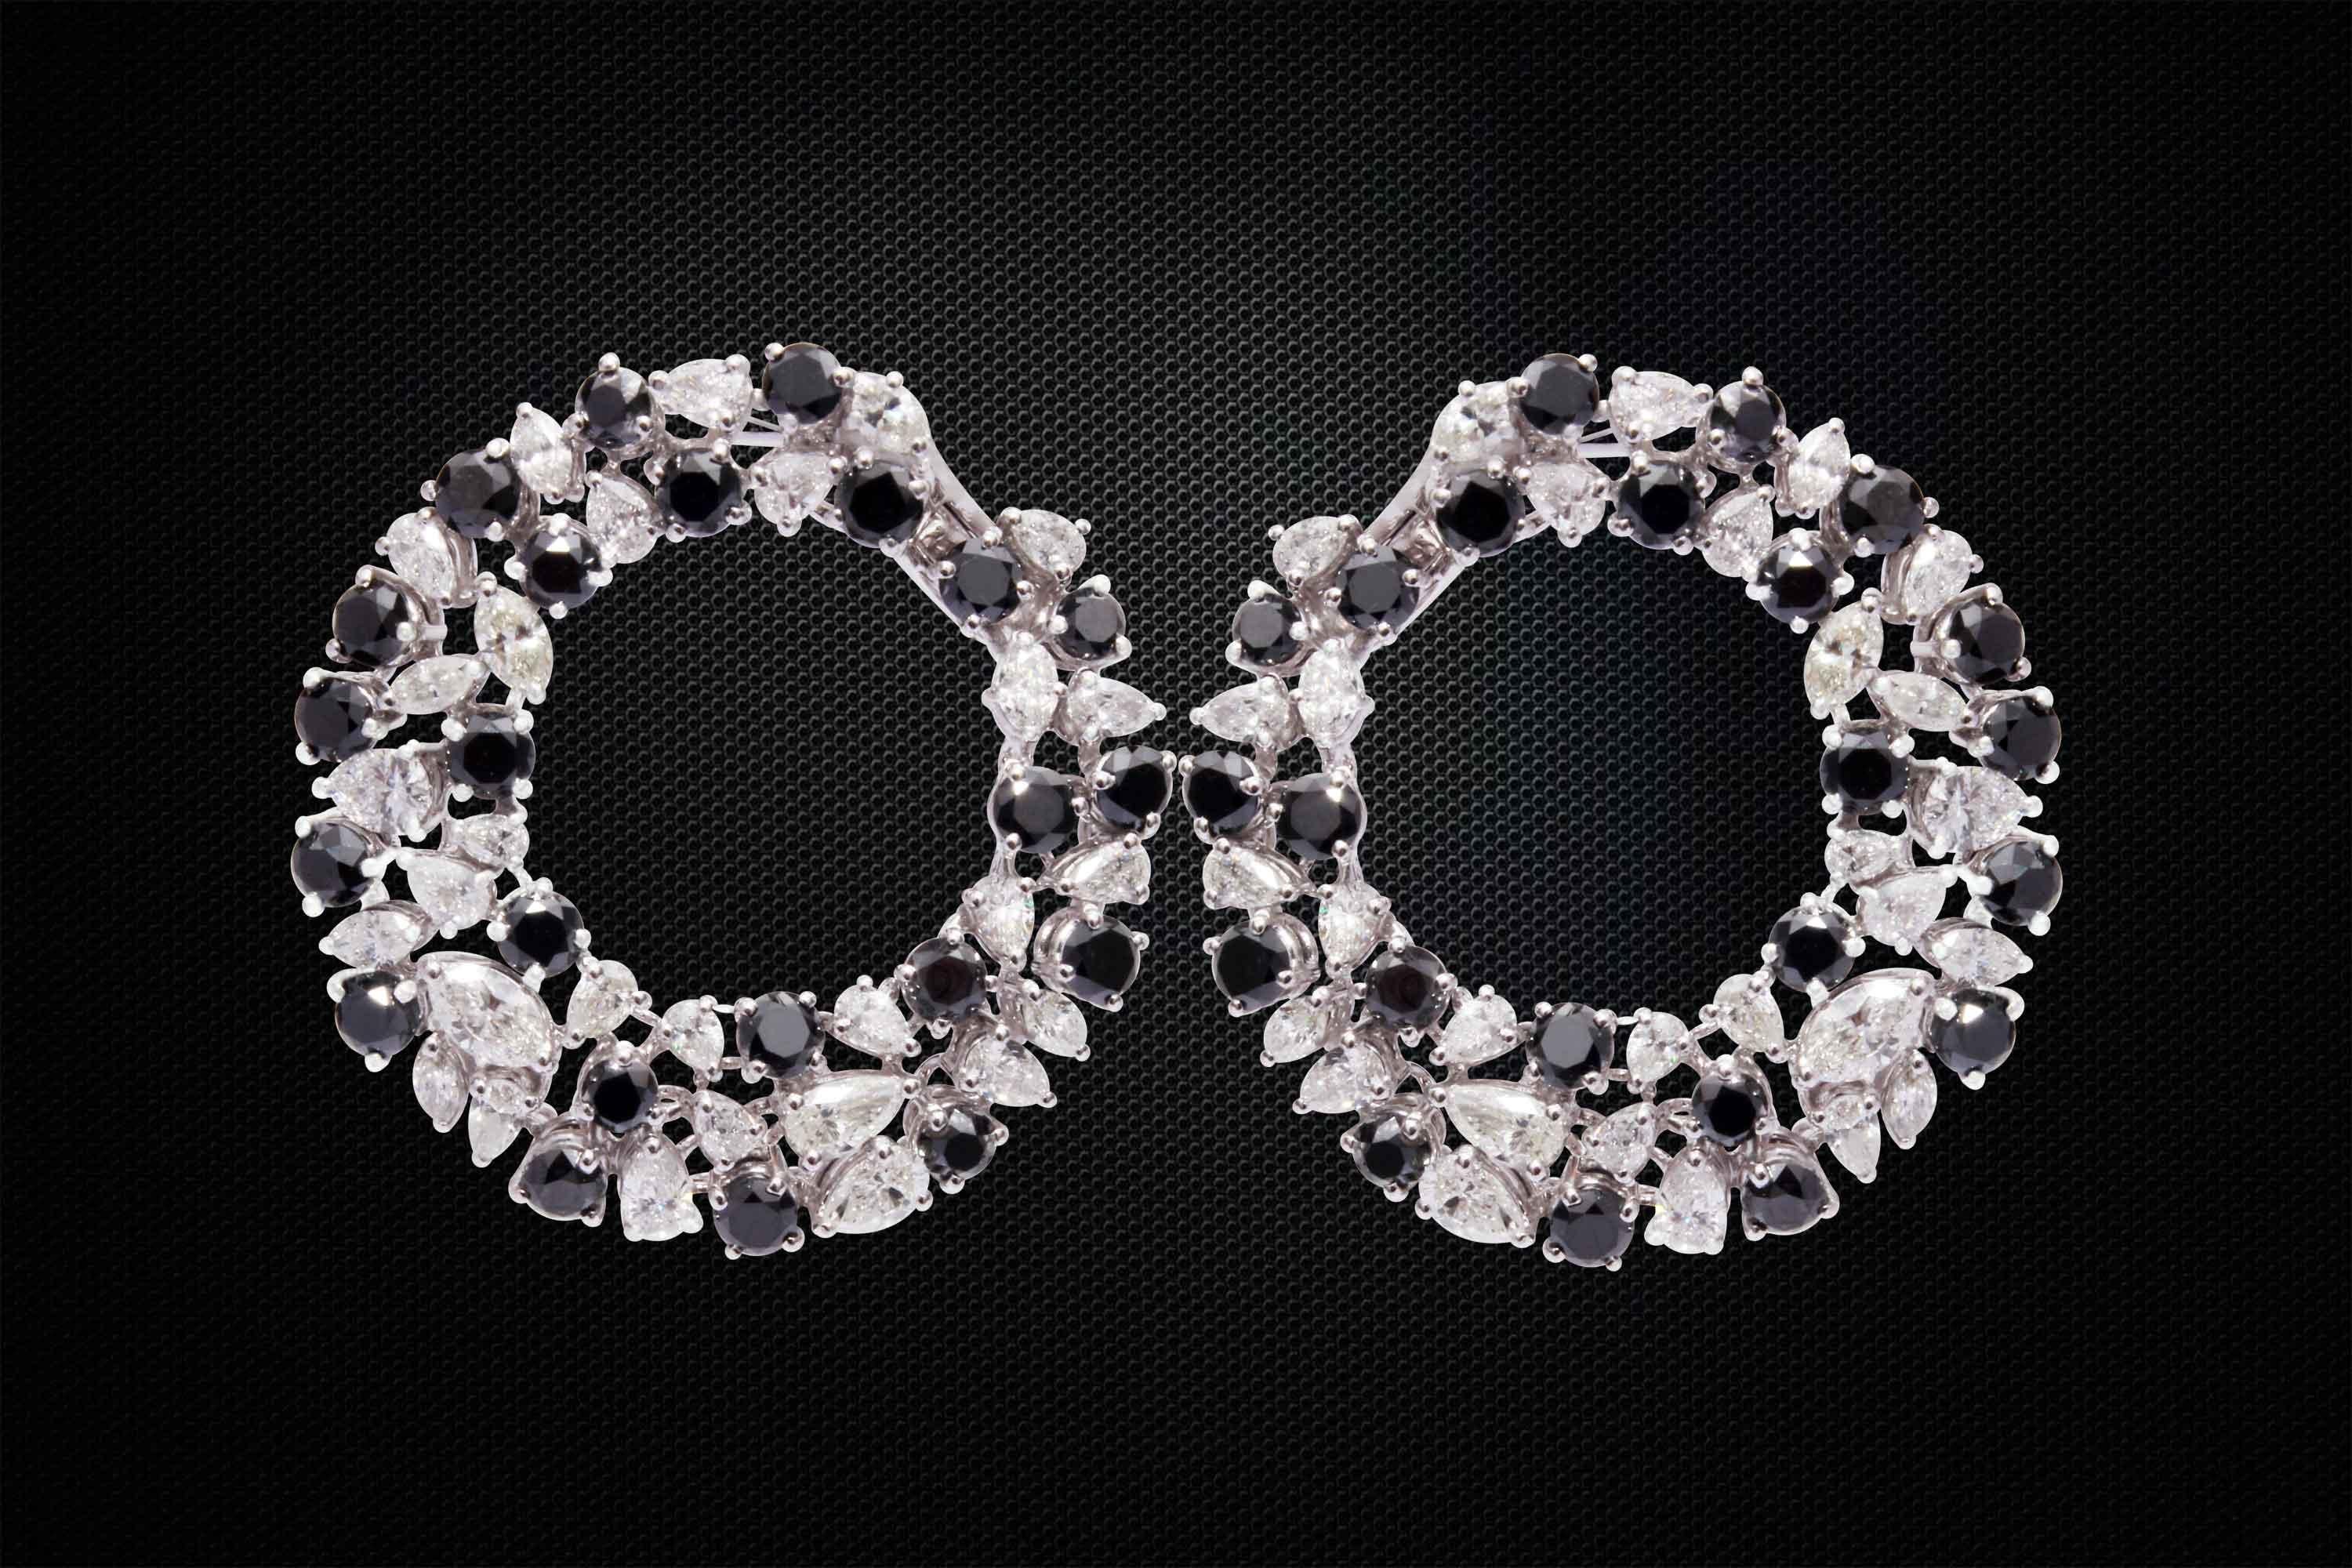 Stylish unique pair of Earrings are embellished with 46 pieces of round cut black diamonds weighing approximately 8.13 carats, 15 pieces of marquise white diamonds weighing approximately 1.39 carats and 43 pieces of pears cut white diamonds weighing